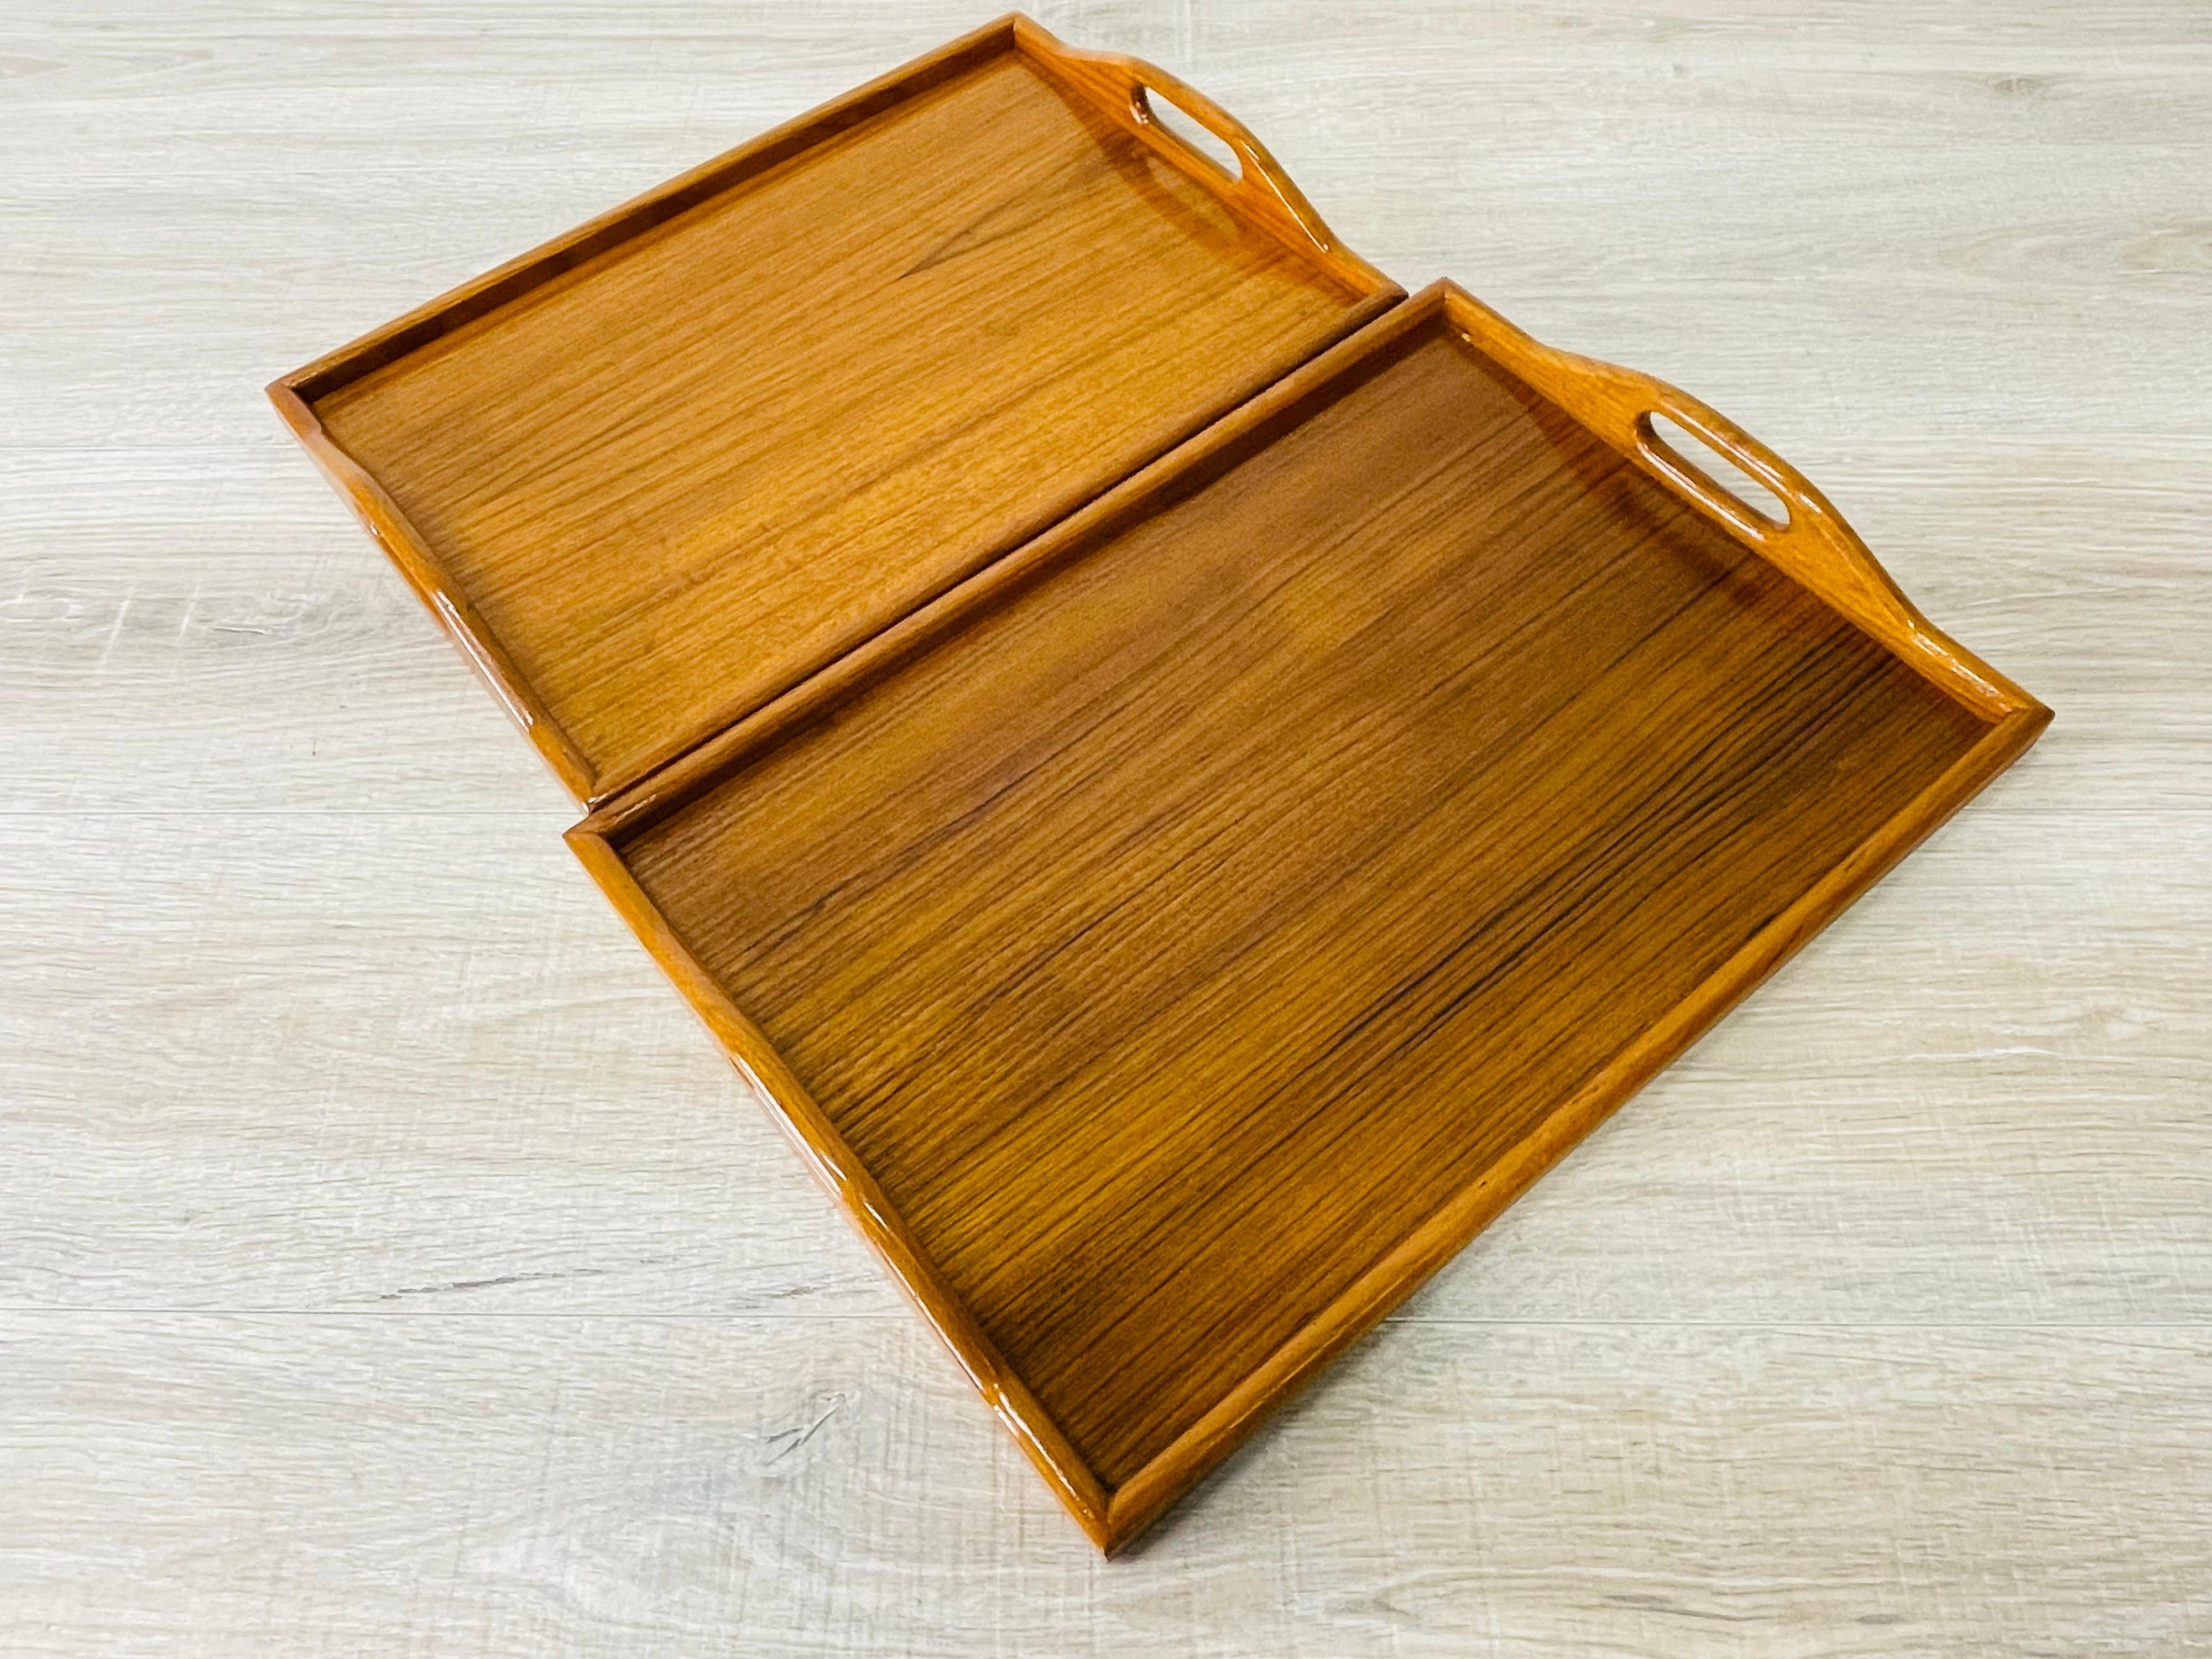 20th Century 1970s Handled Teak Serving Trays, Pair For Sale